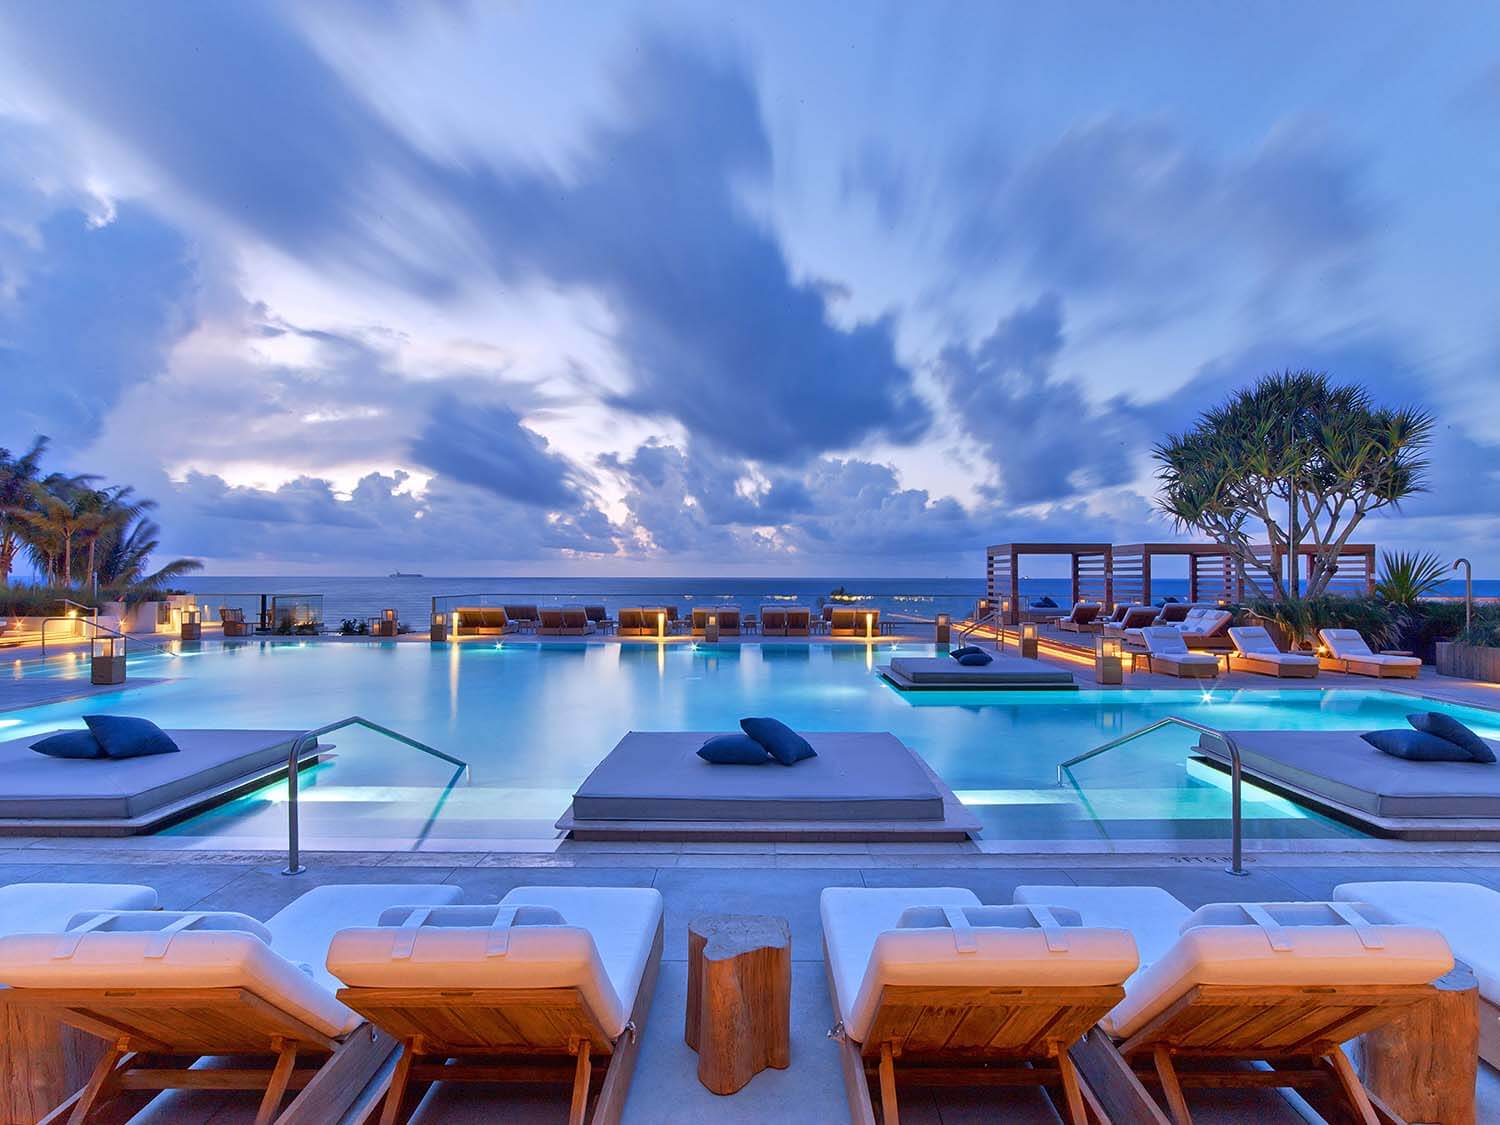 The Most Beautiful Swimming Pools Around the World — Spa and Beauty Today